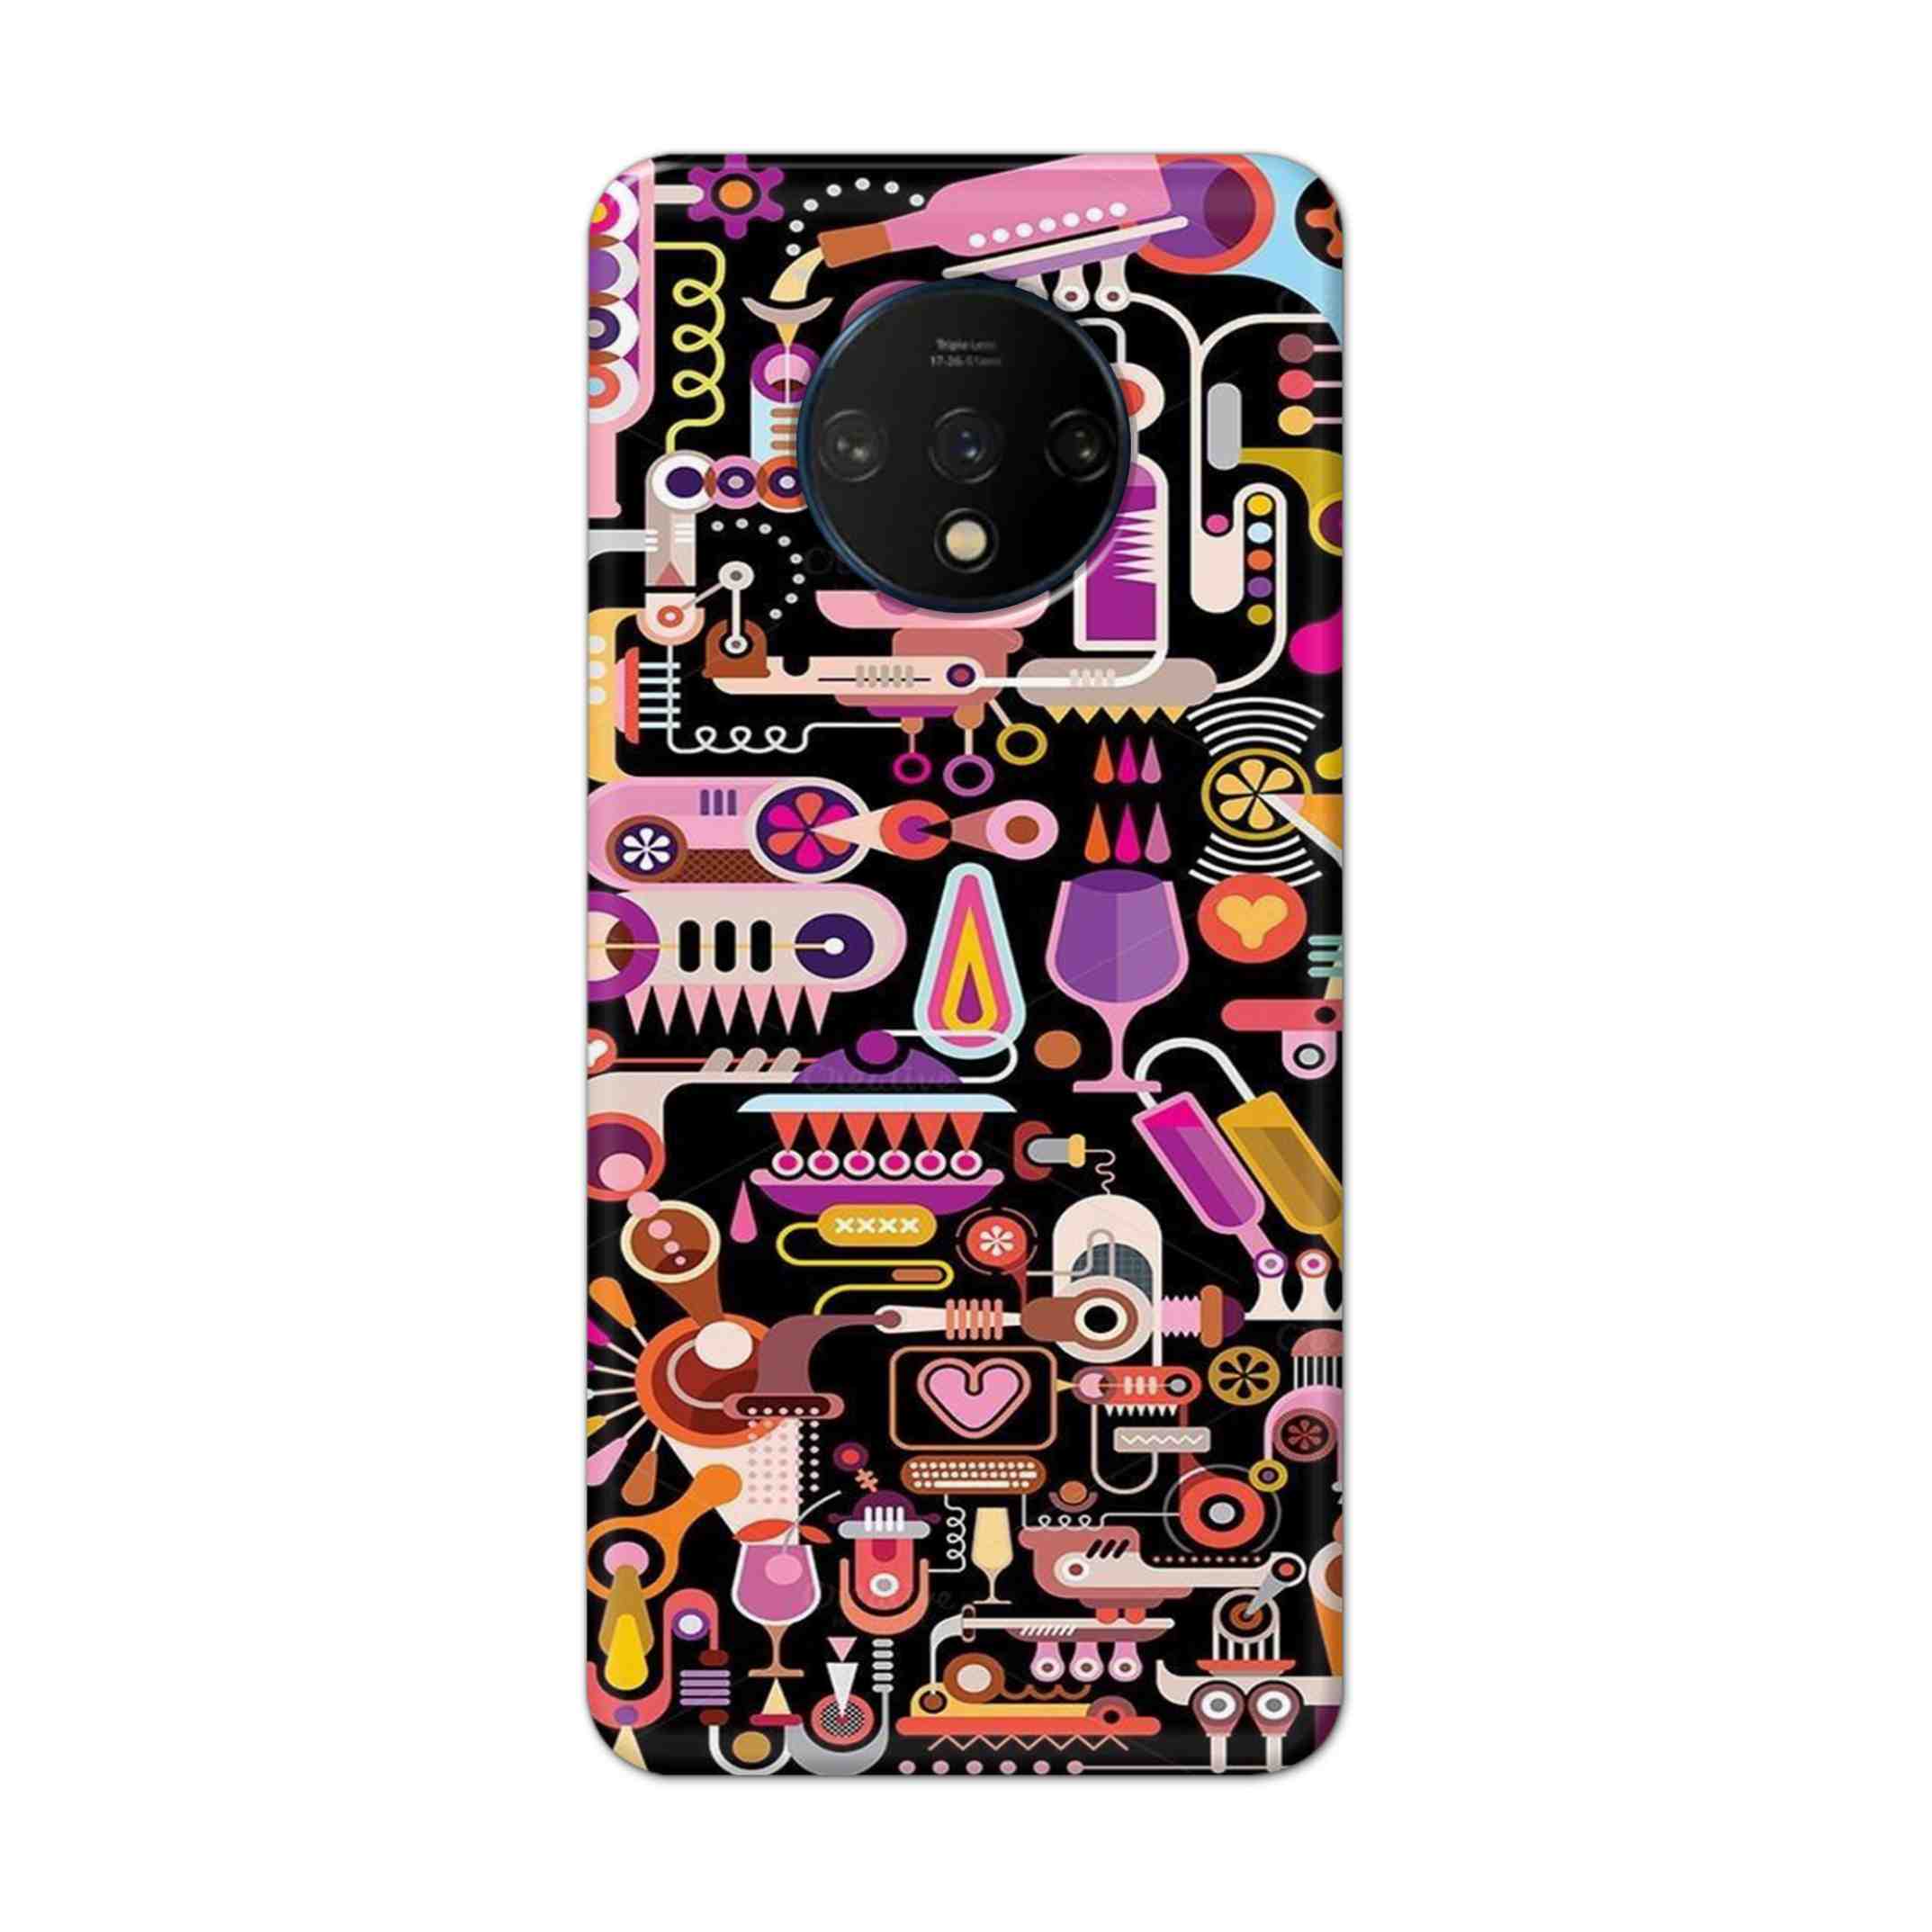 Buy Lab Art Hard Back Mobile Phone Case Cover For OnePlus 7T Online